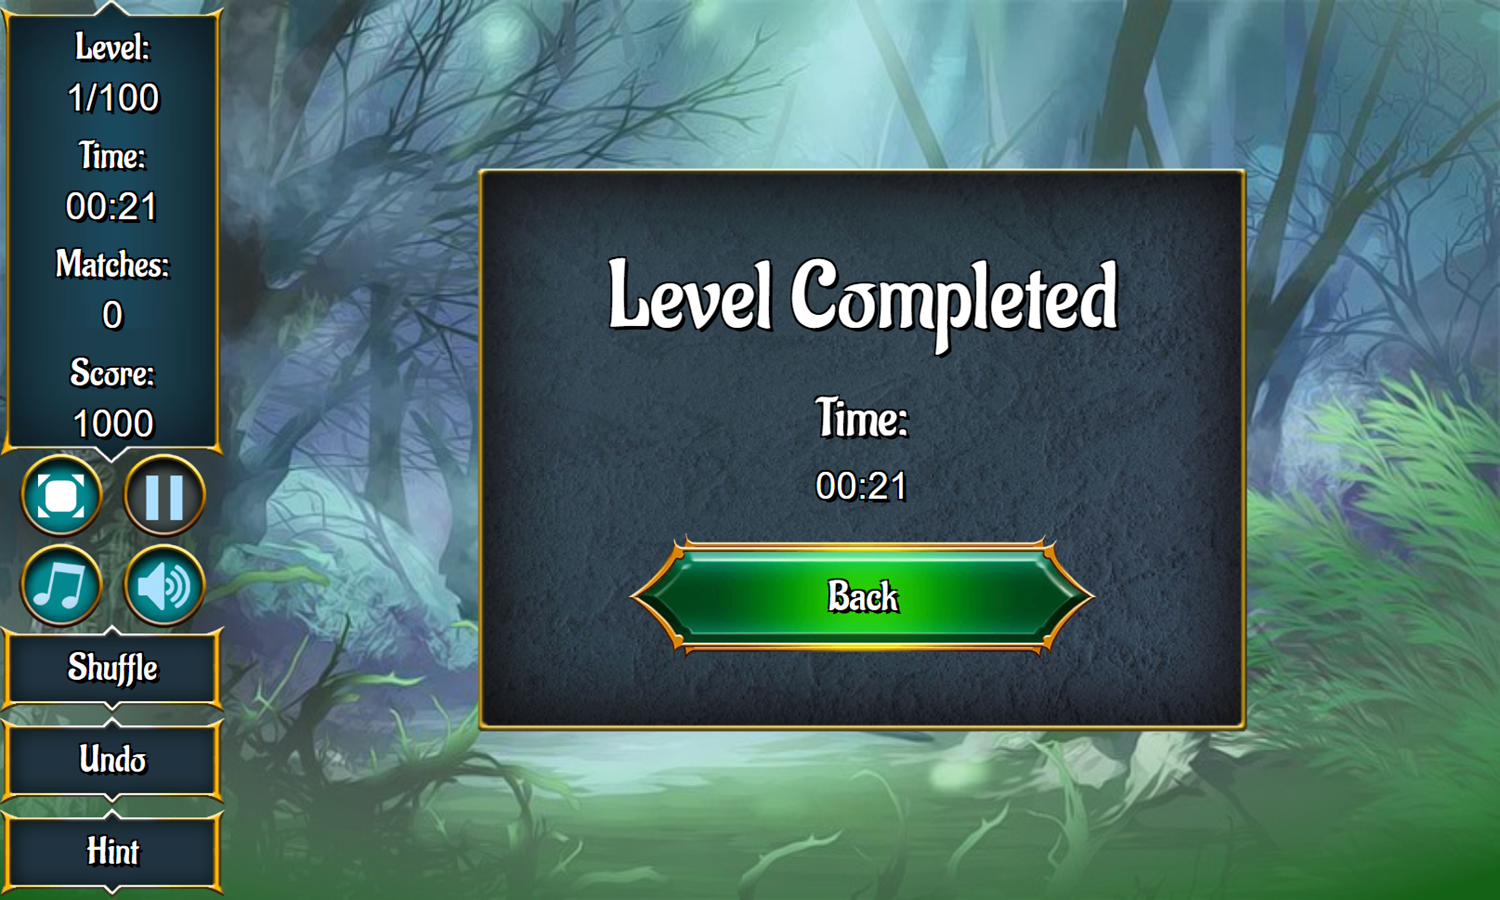 The Lost World Game Level Completed Screenshot.